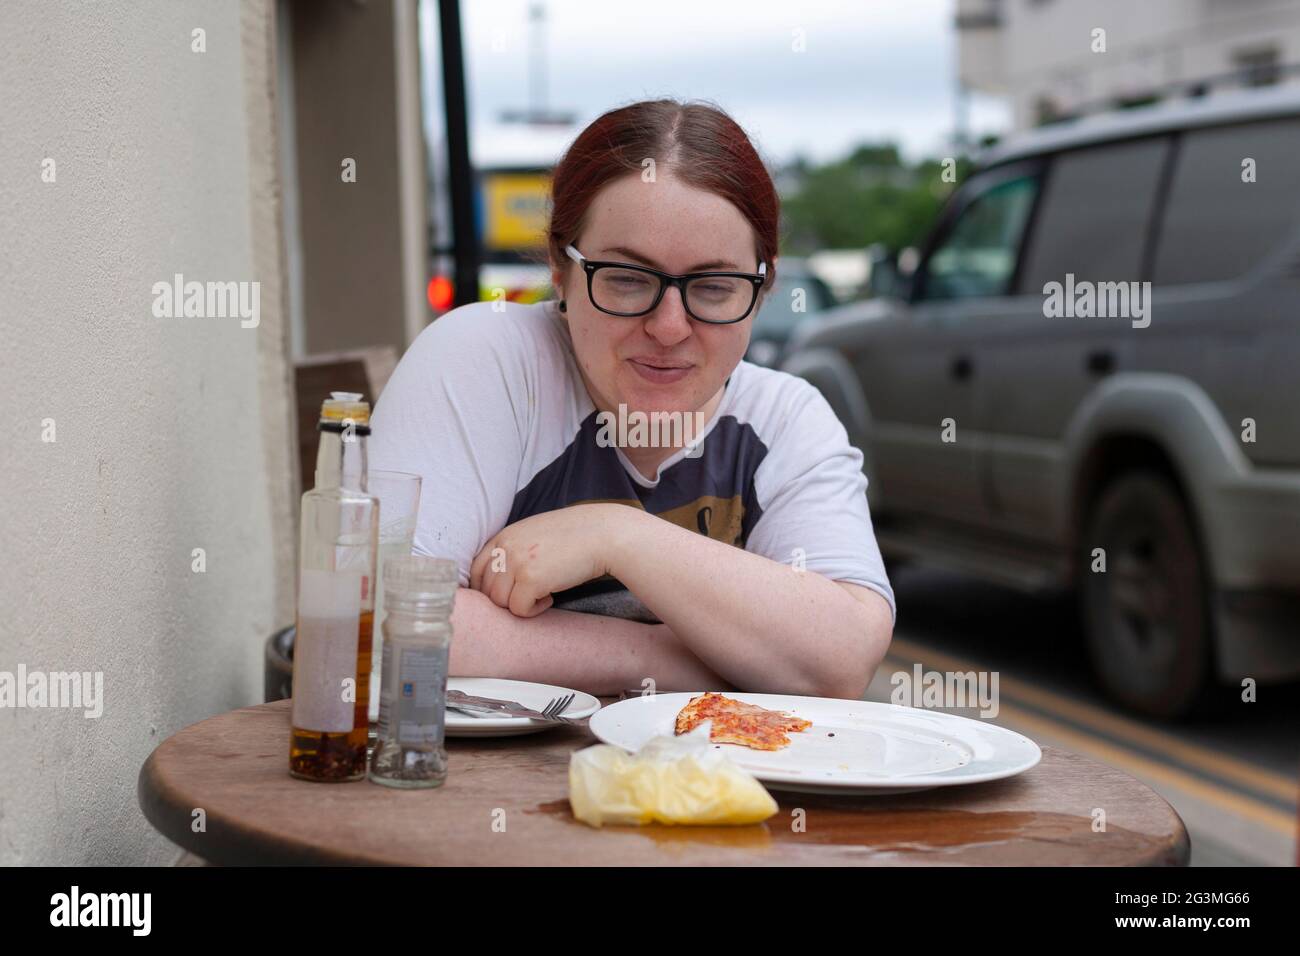 Young Millennial woman at outdoor cafe Stock Photo